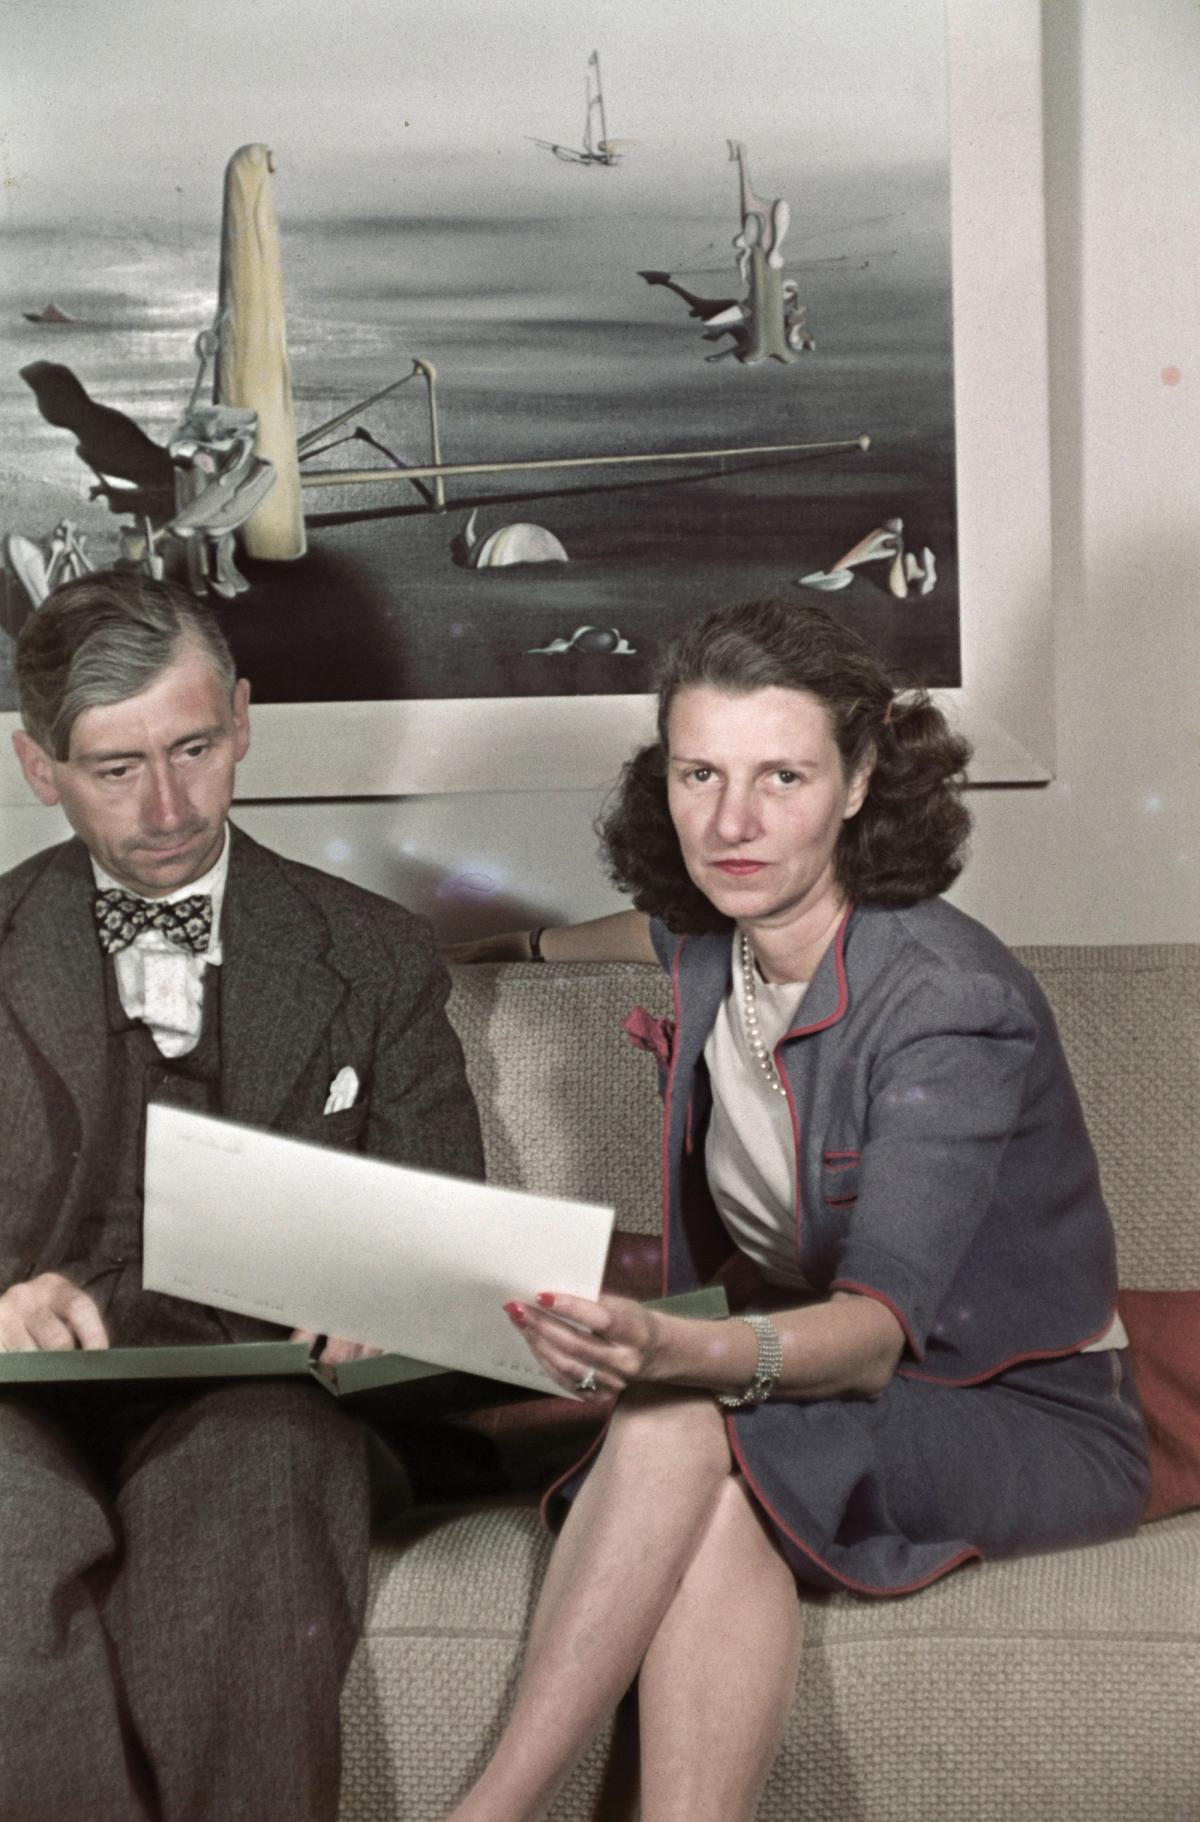 Peggy Guggenheim with the English art historian Herbert Read in 1939, during her time in the UK
Gisèle Freund/RMN-GP
